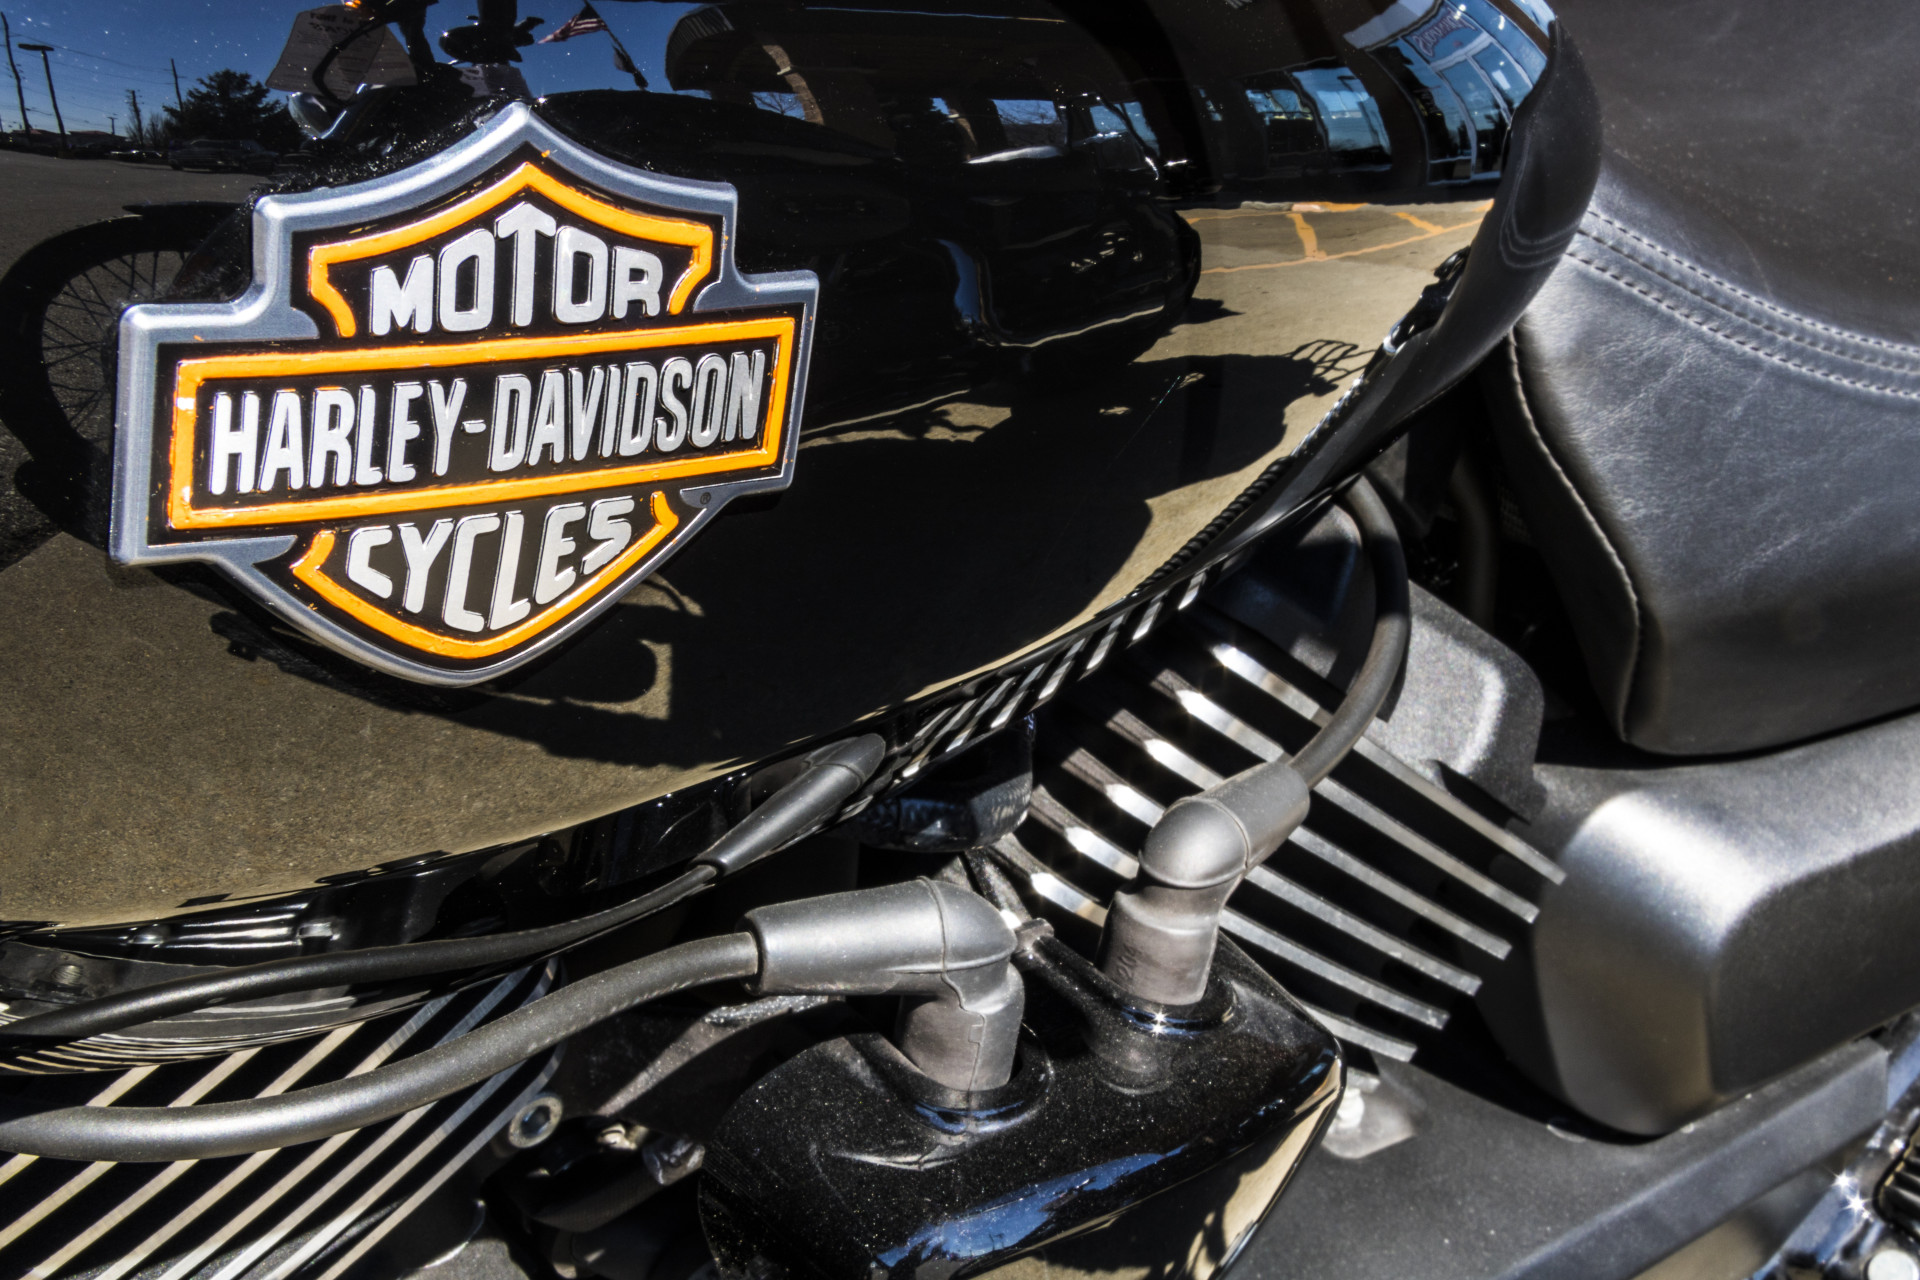 One of the oldest and most well-established brands of motorcycles is the American Harley-Davidson, which was founded in 1903.<p>You may also like:<a href="https://www.starsinsider.com/n/459036?utm_source=msn.com&utm_medium=display&utm_campaign=referral_description&utm_content=354515v5en-en"> Movie sequels that cut out main characters</a></p>